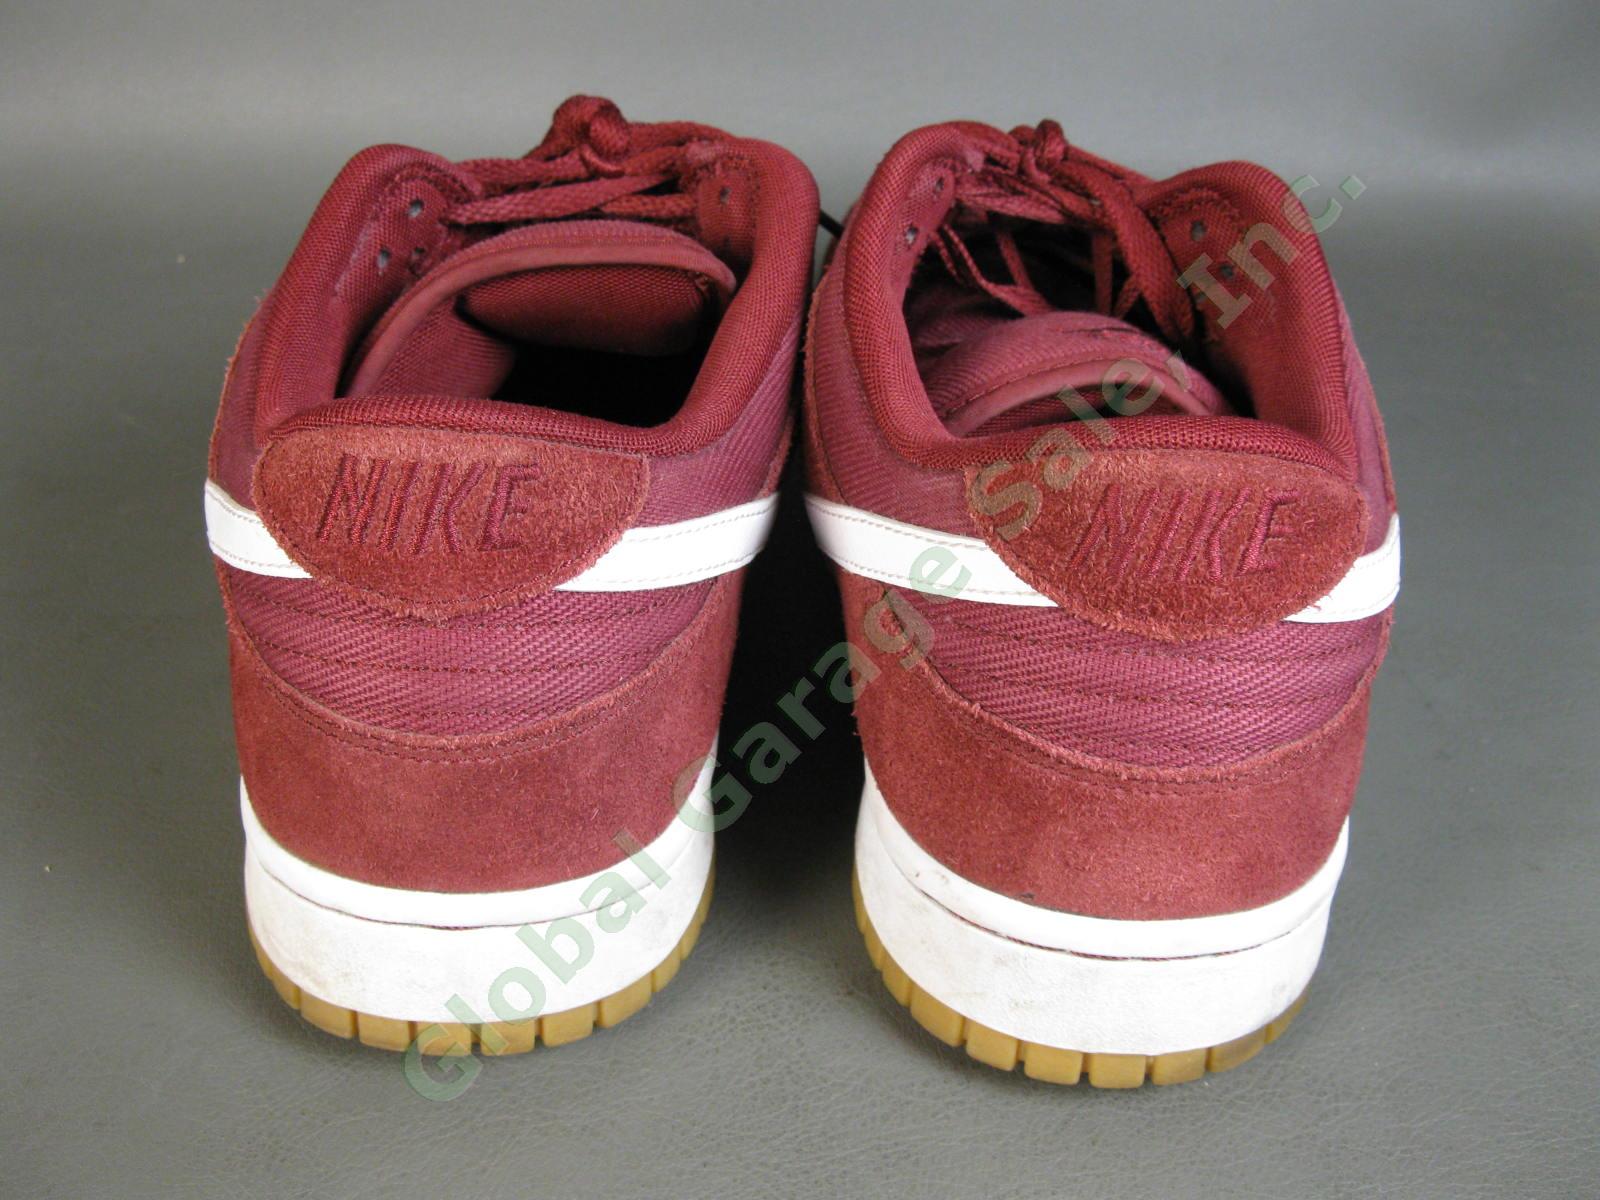 Nike Dunk Low Team Red White Sneaker Shoes AA1056-600 Canvas Burgundy Excellent 3